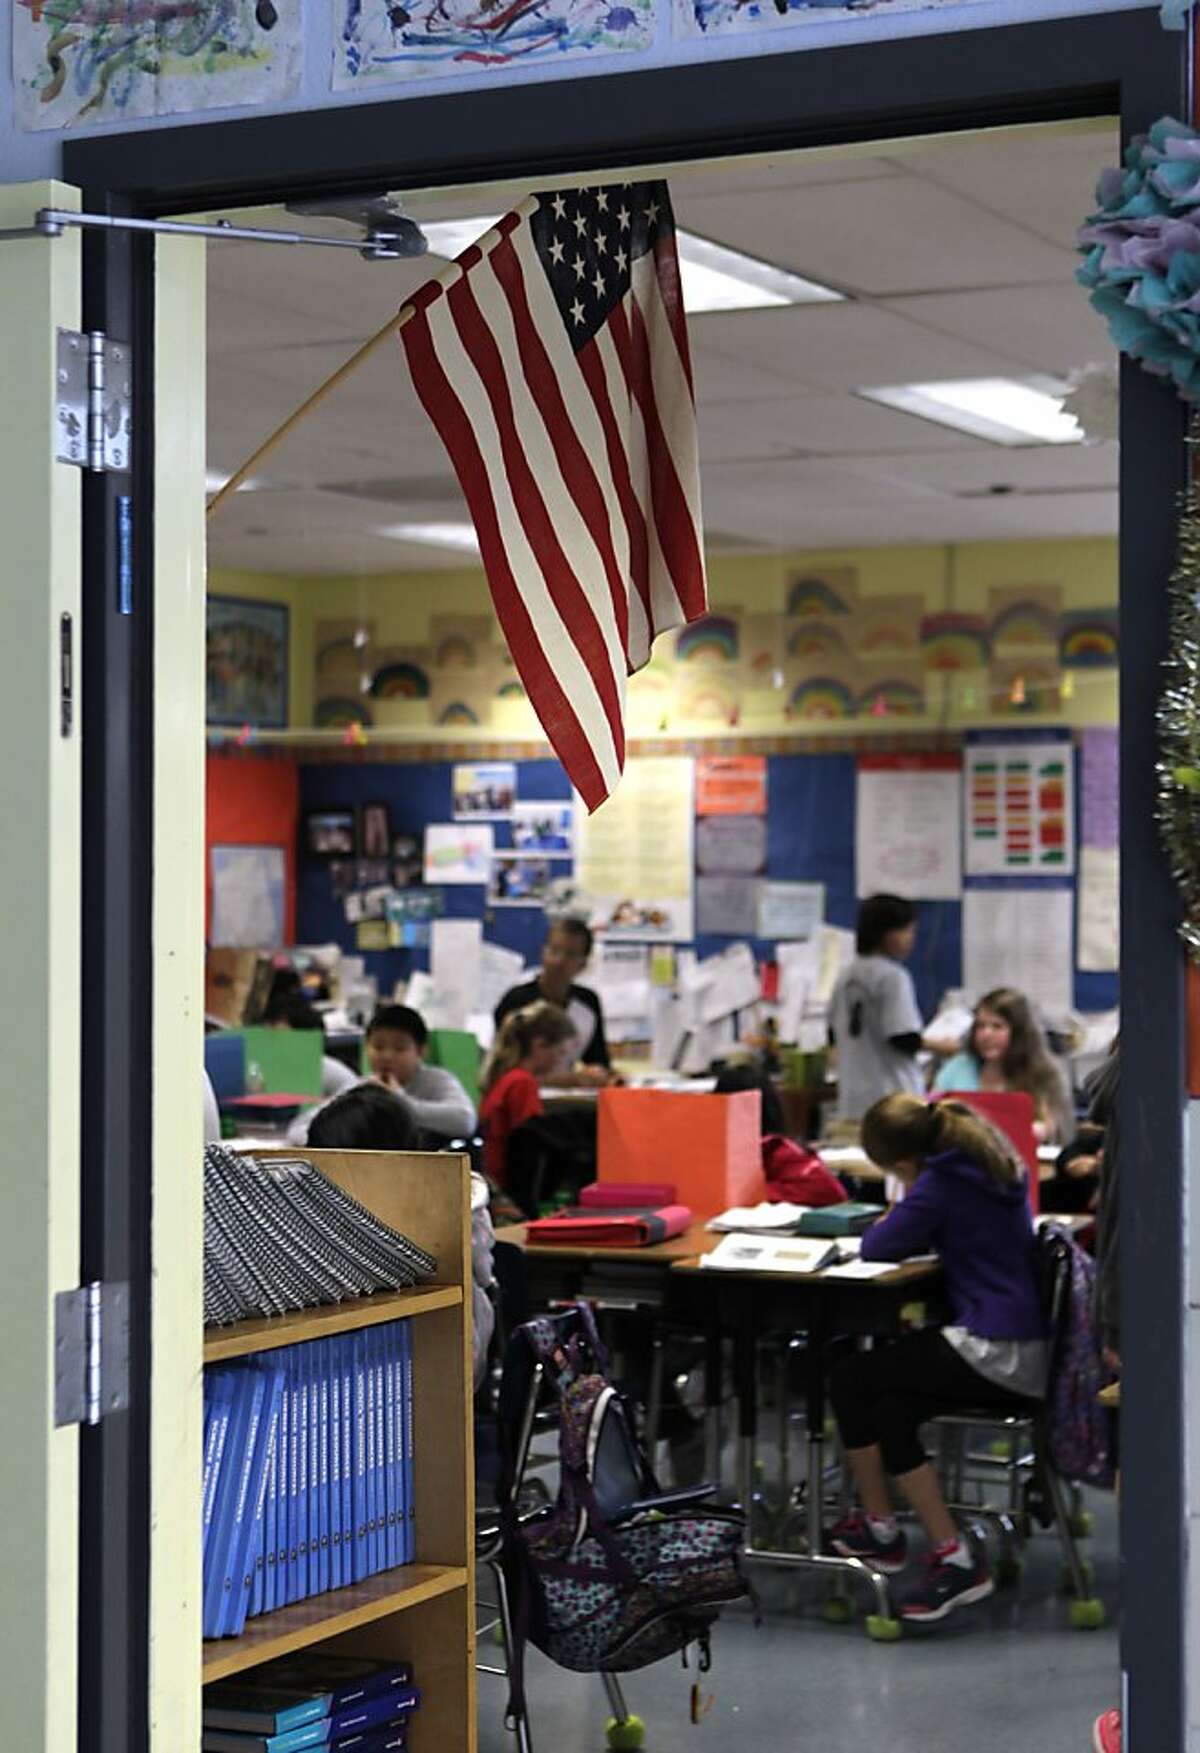 The U.S. flag hangs in David Allyn's 5th-grade classroom at Argonne Elementary School in San Francisco, Calif. on Friday, March 15, 2013. Students at Argonne recite the Pledge of Allegiance during bi-weekly assemblies on the schoolyard.